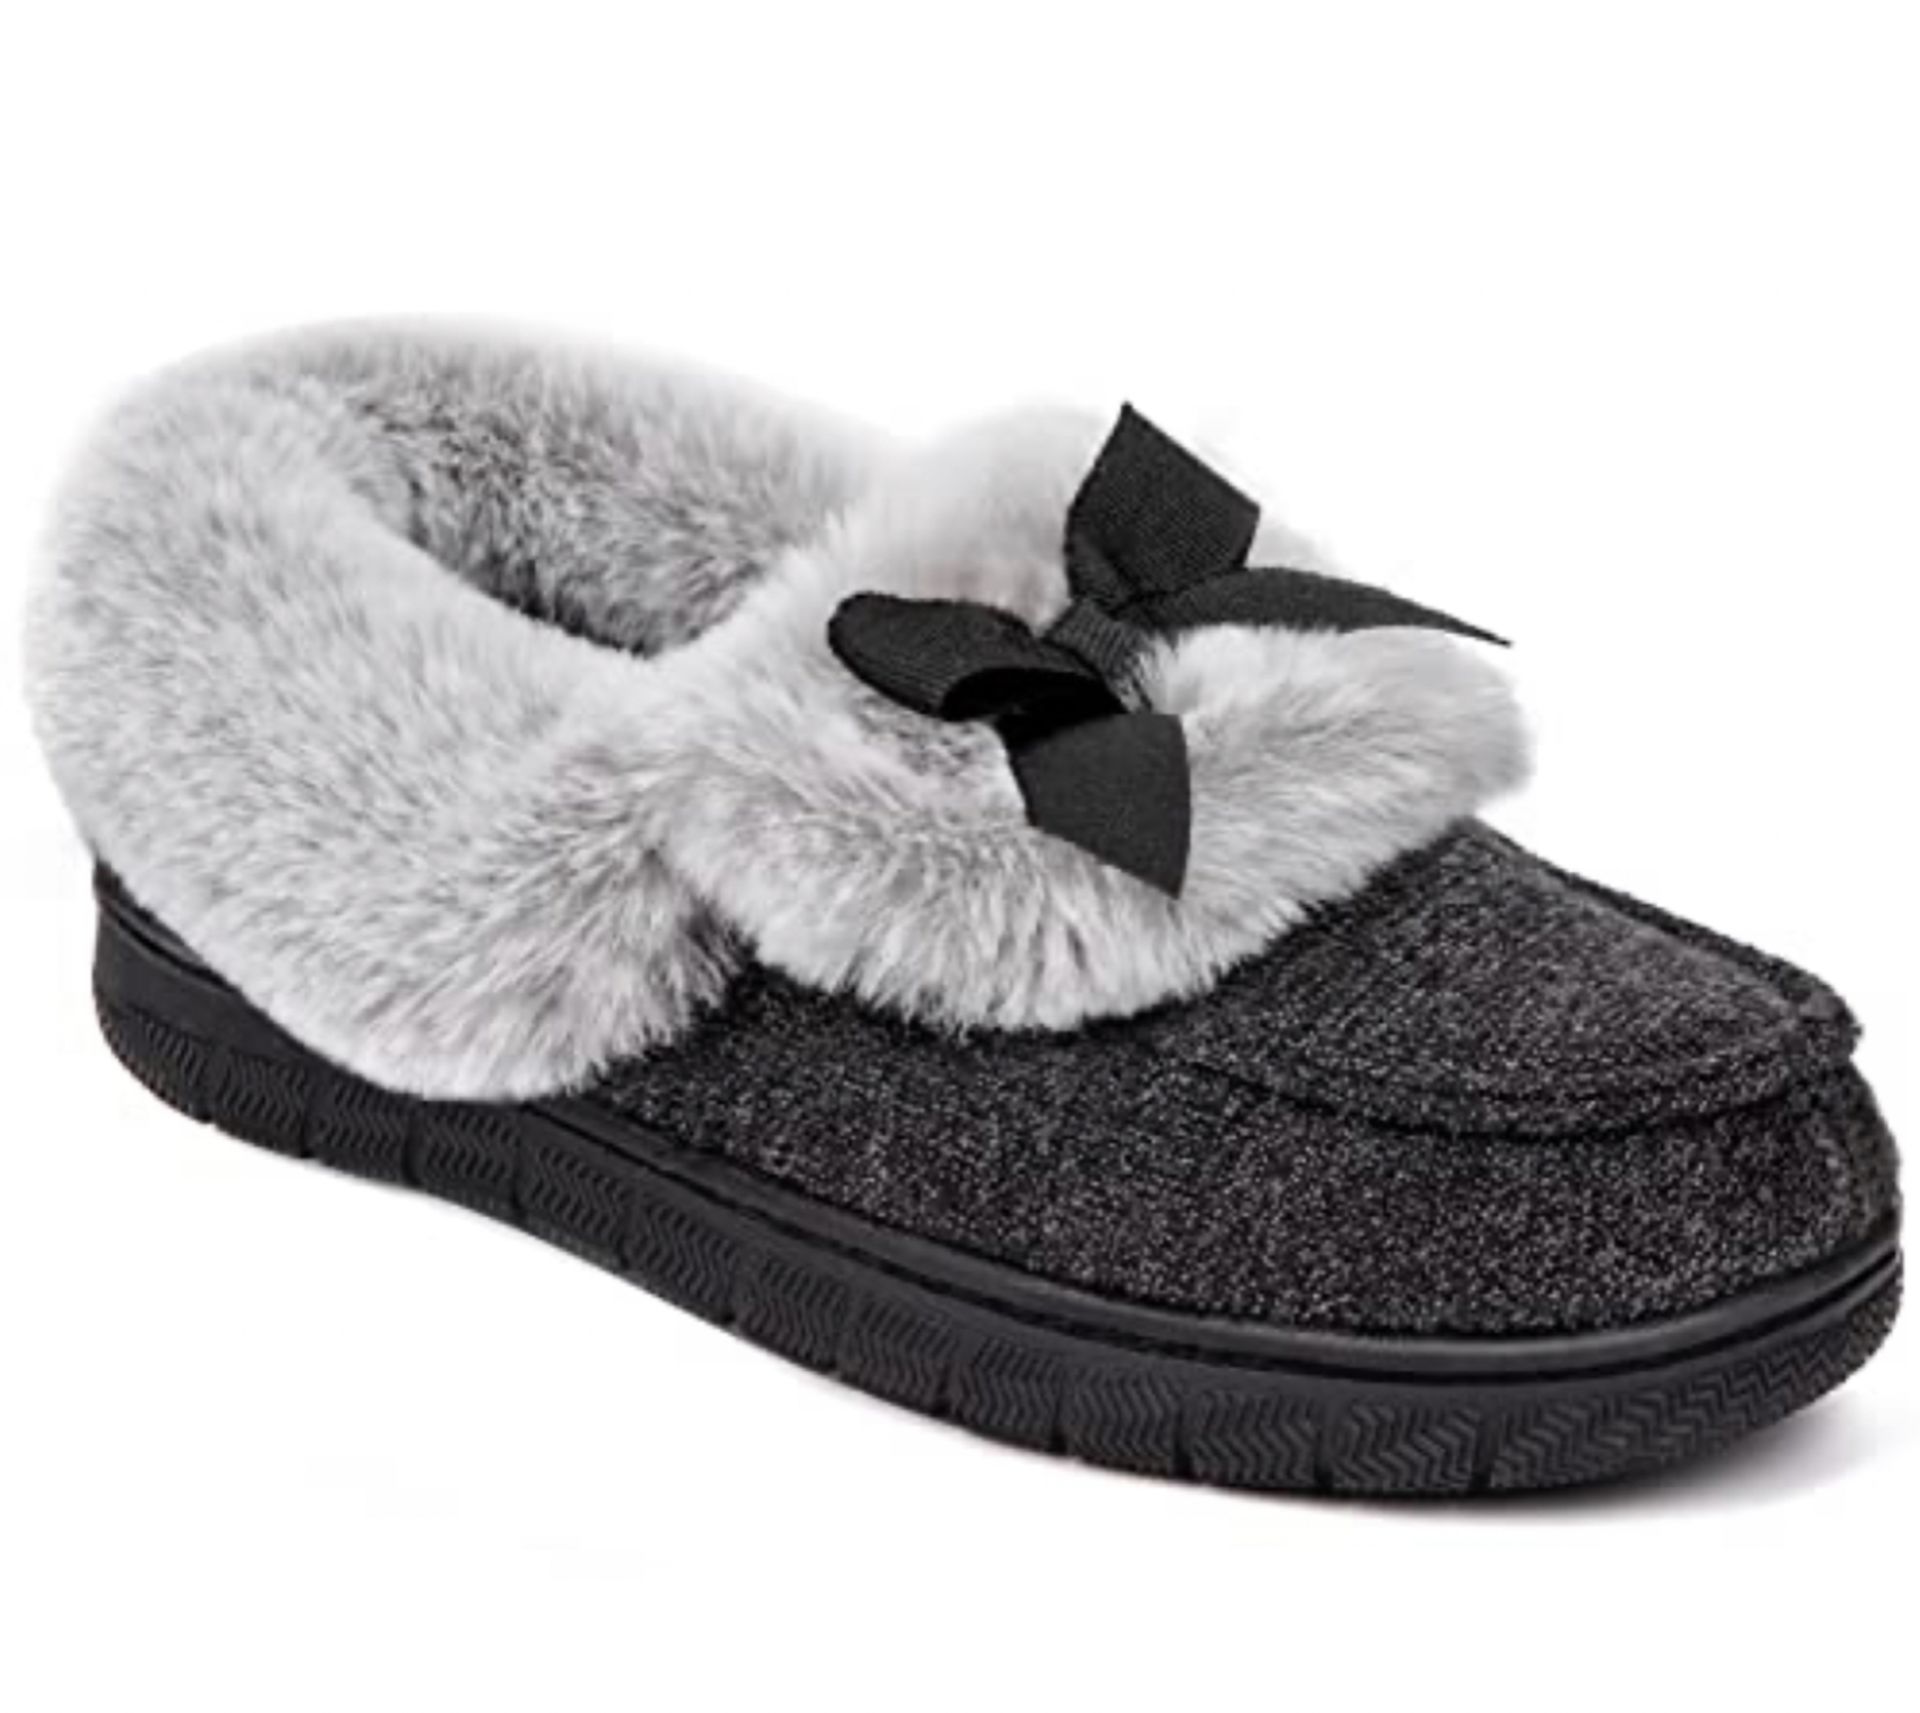 RRP £18.99 VeraCosy Women's Knitted Fluffy Memory Foam Warm Slippers with Bow, 9 UK